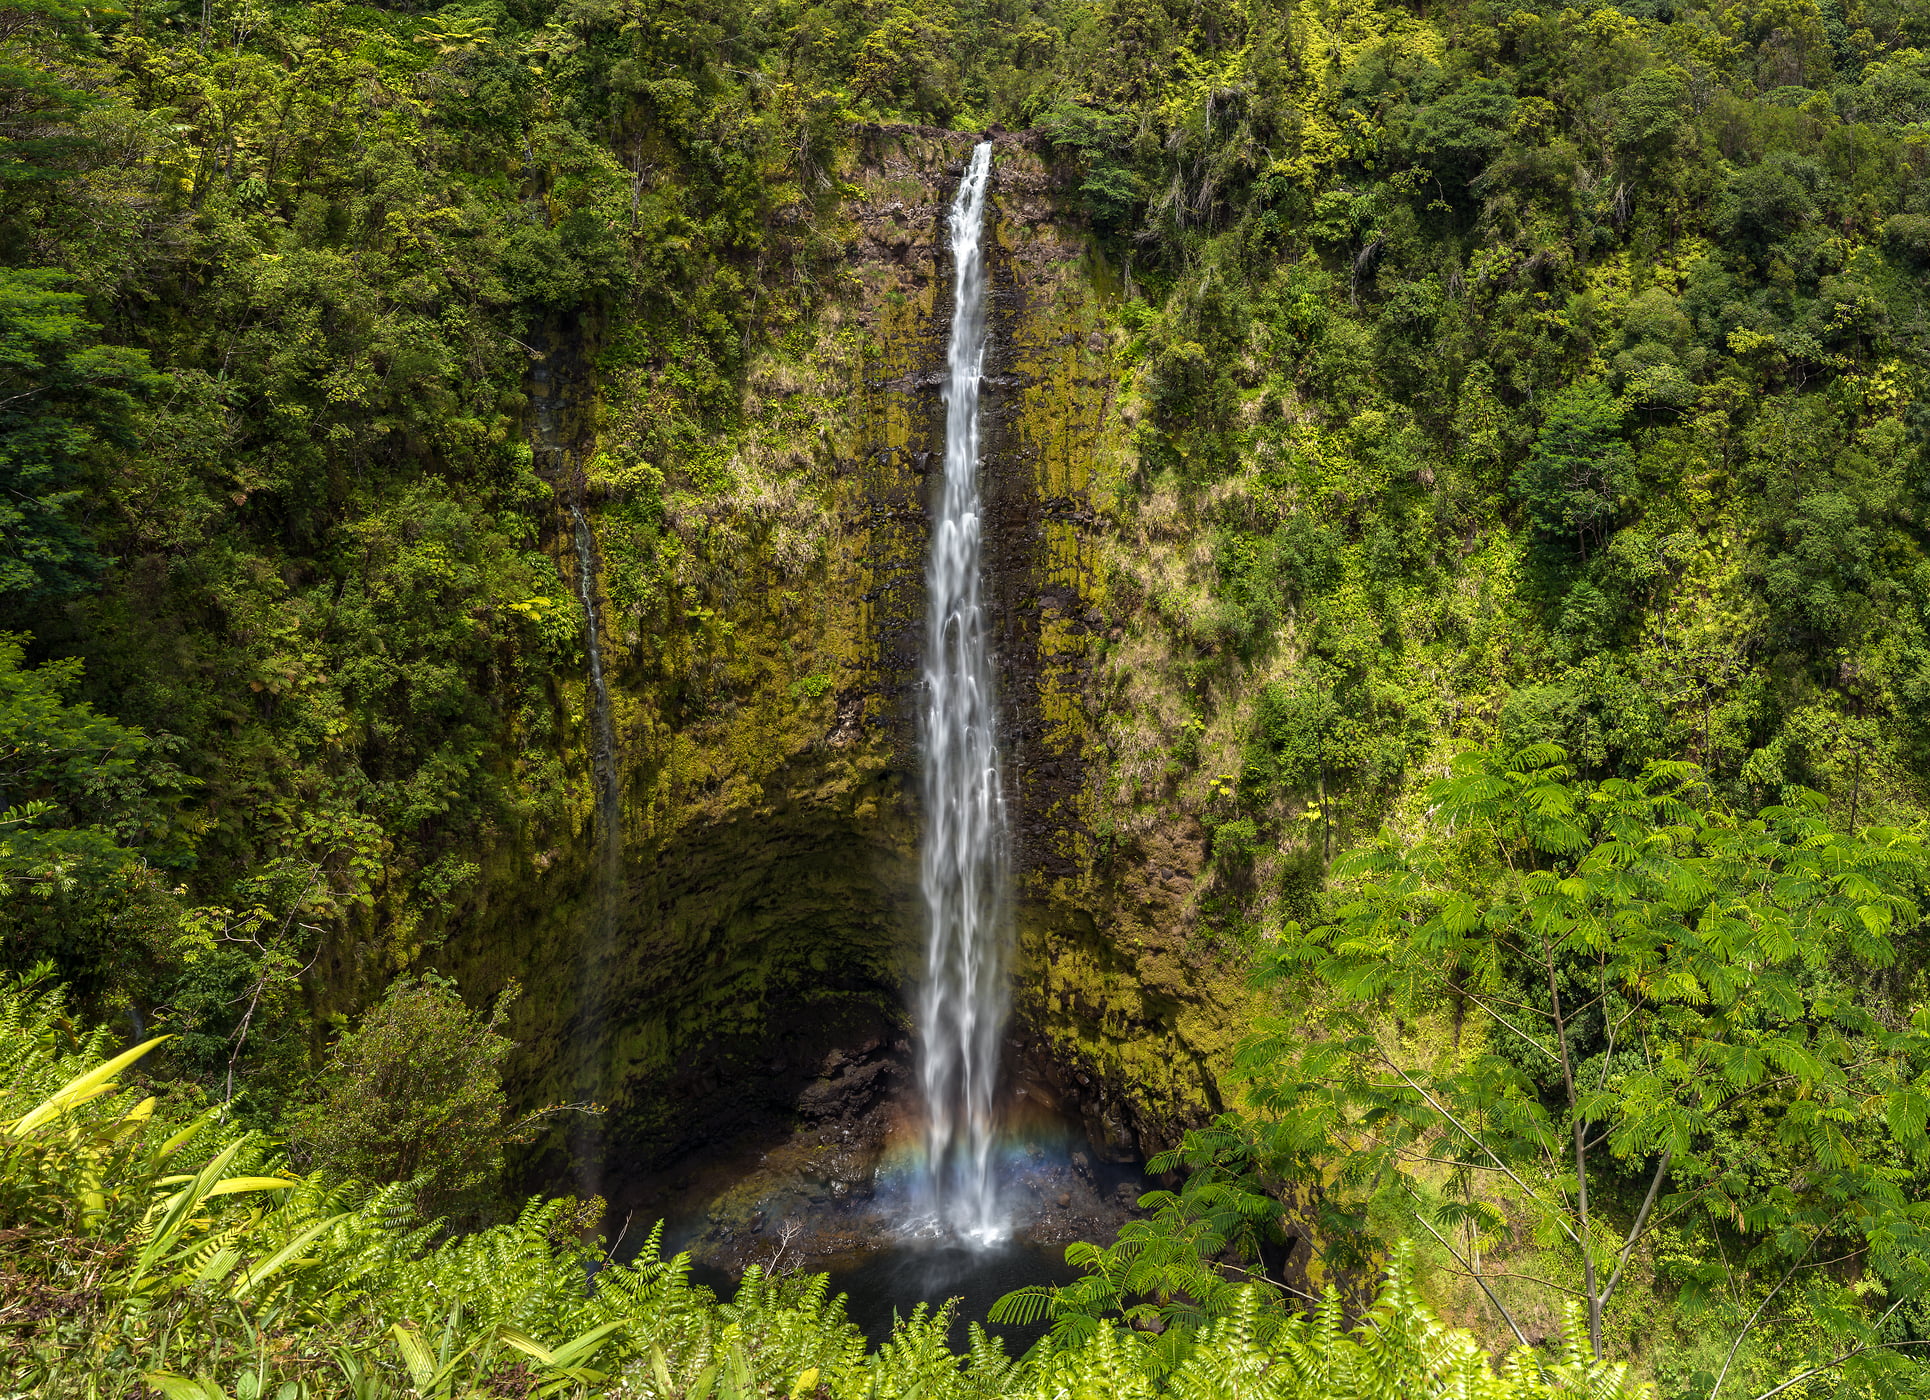 194 megapixels! A very high resolution, large-format VAST photo of a tropical waterfall in a jungle; nature photograph print created by Jim Tarpo in Honomu, Hawaii.